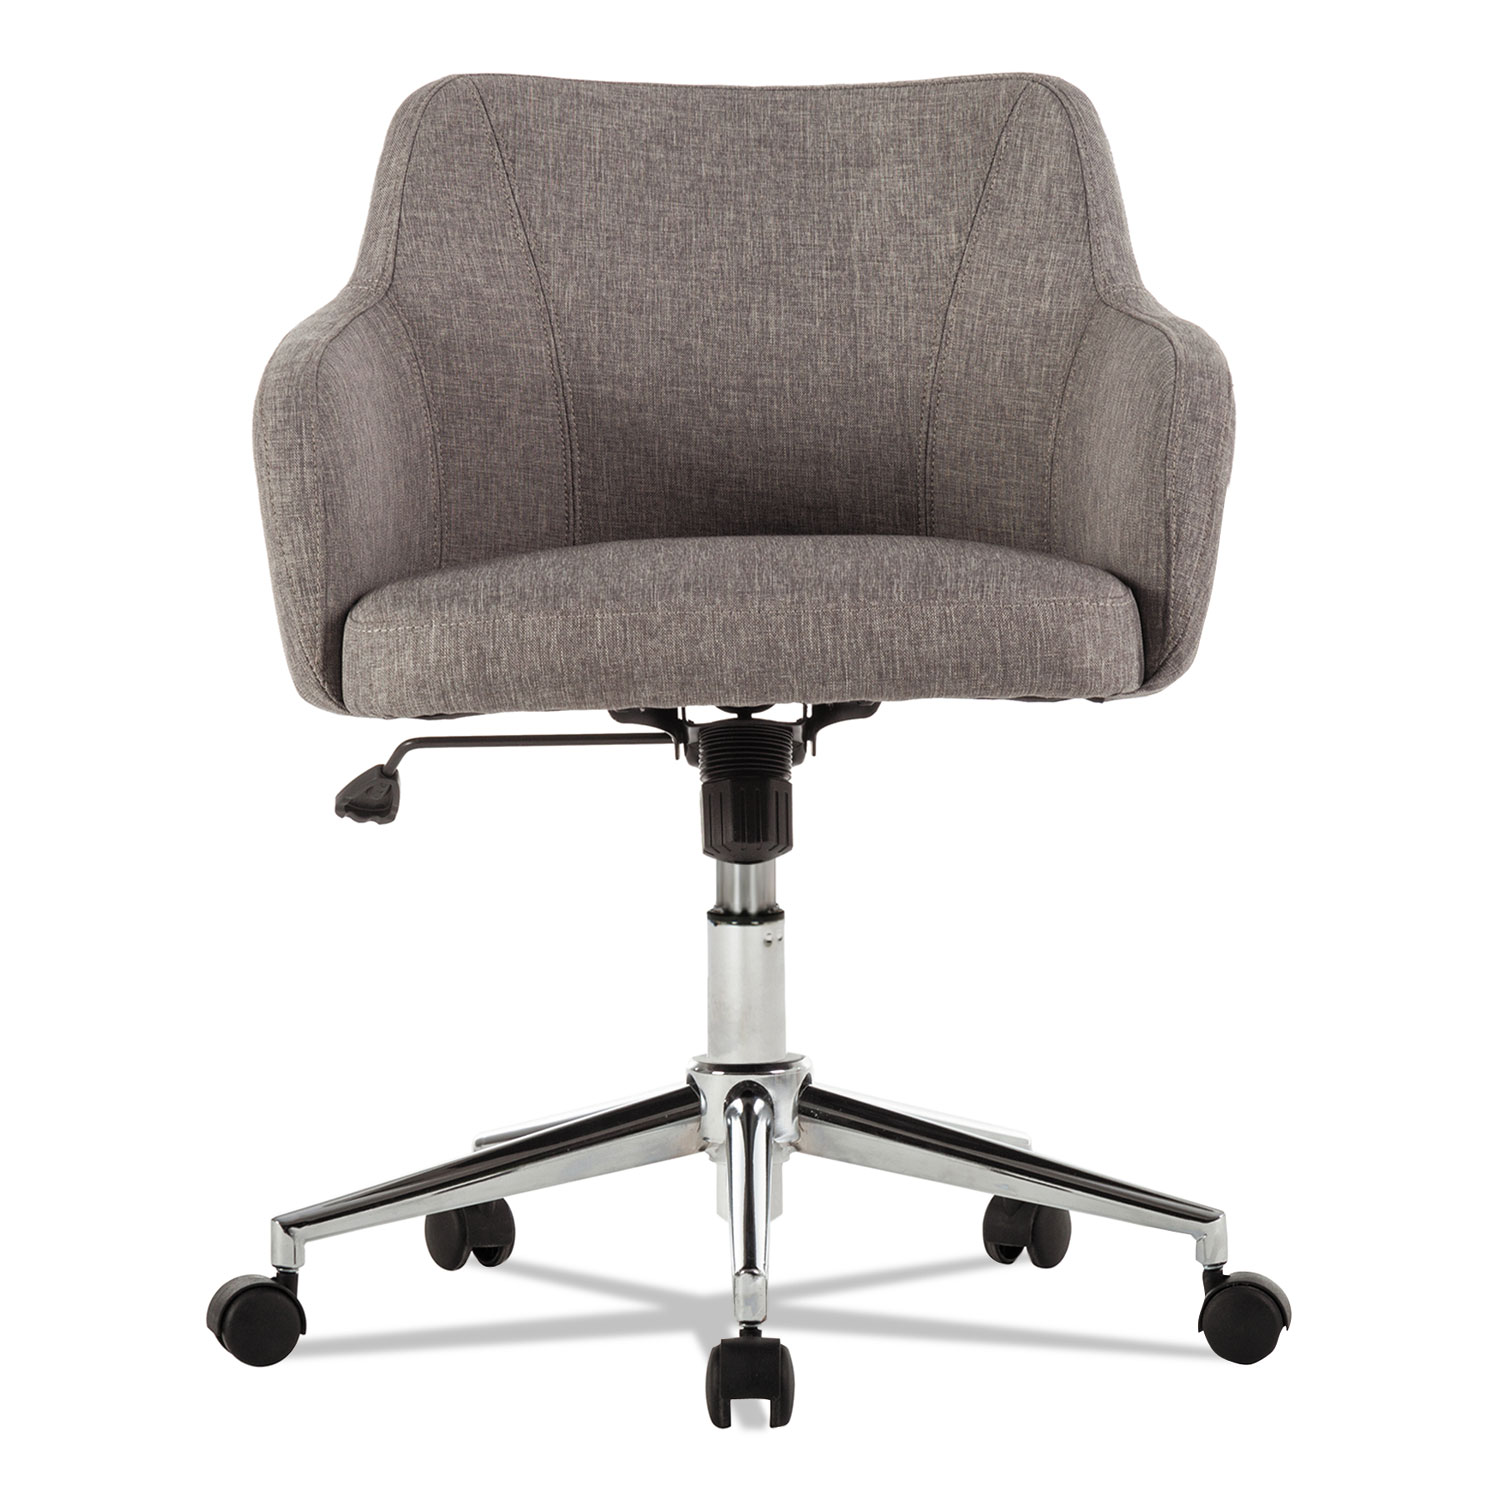 Captain Series Mid-Back Chair, Gray Tweed